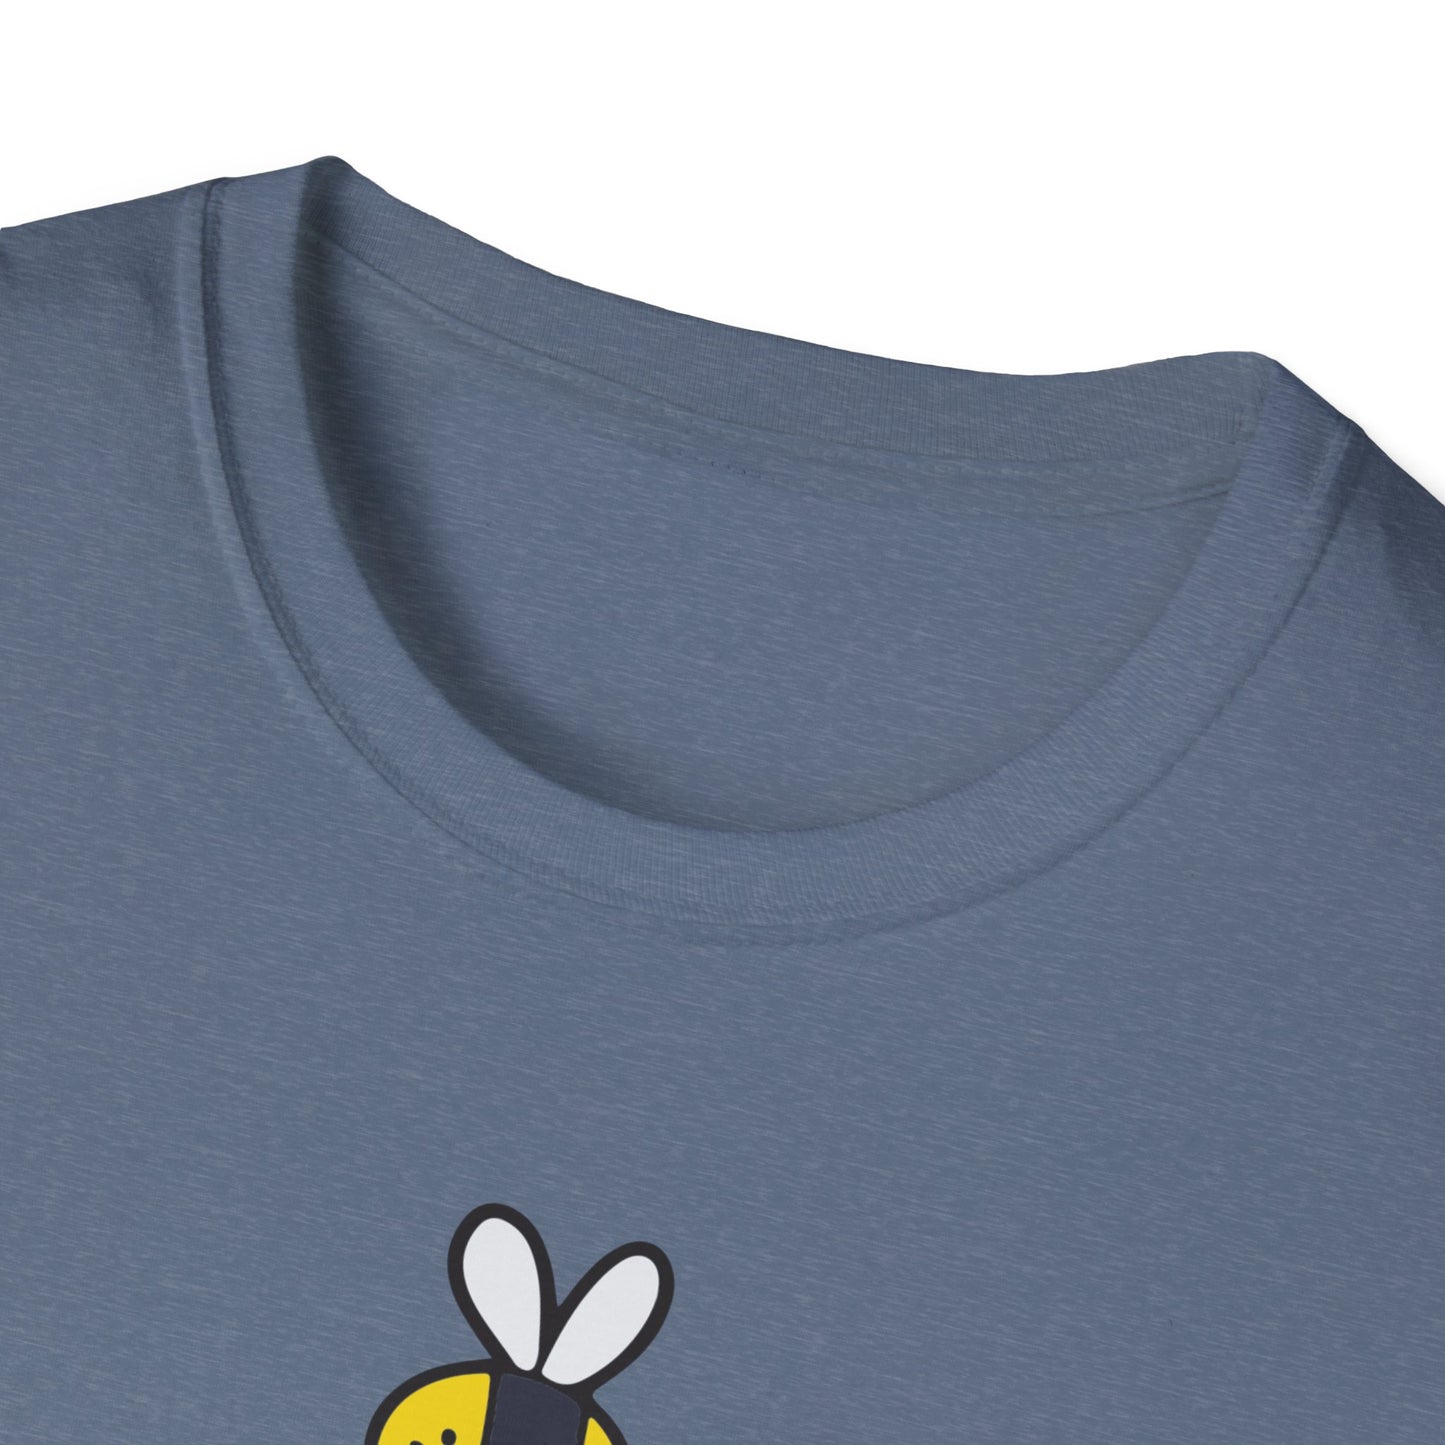 Full Potential Mom Bee v2 Unisex Softstyle T-Shirt